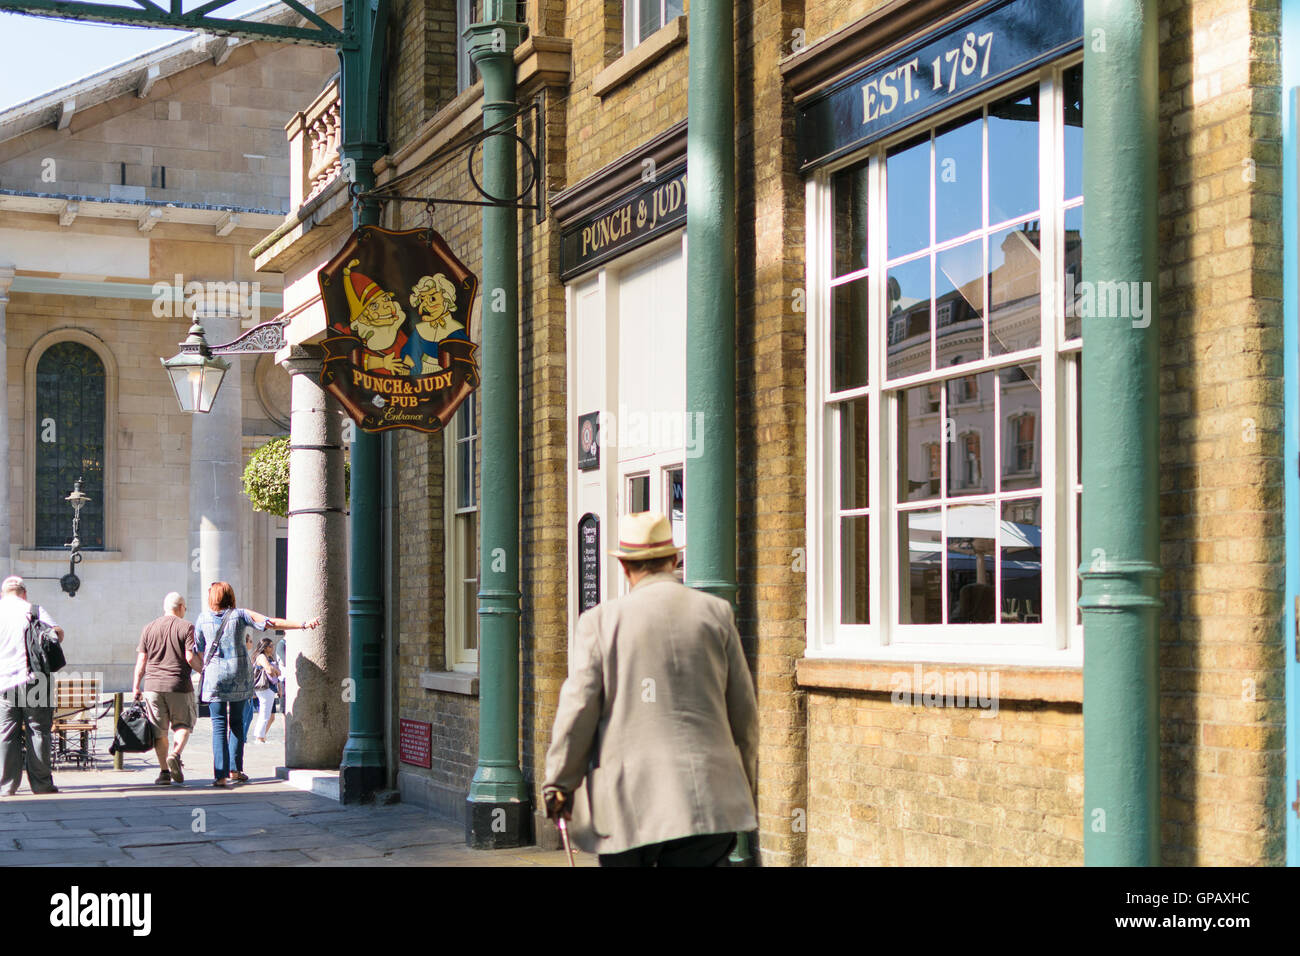 London, England - 30 August 2016: An unidentified man walks pass Punch & Judy pub in Covent Market. The pub was built in 1787 Stock Photo